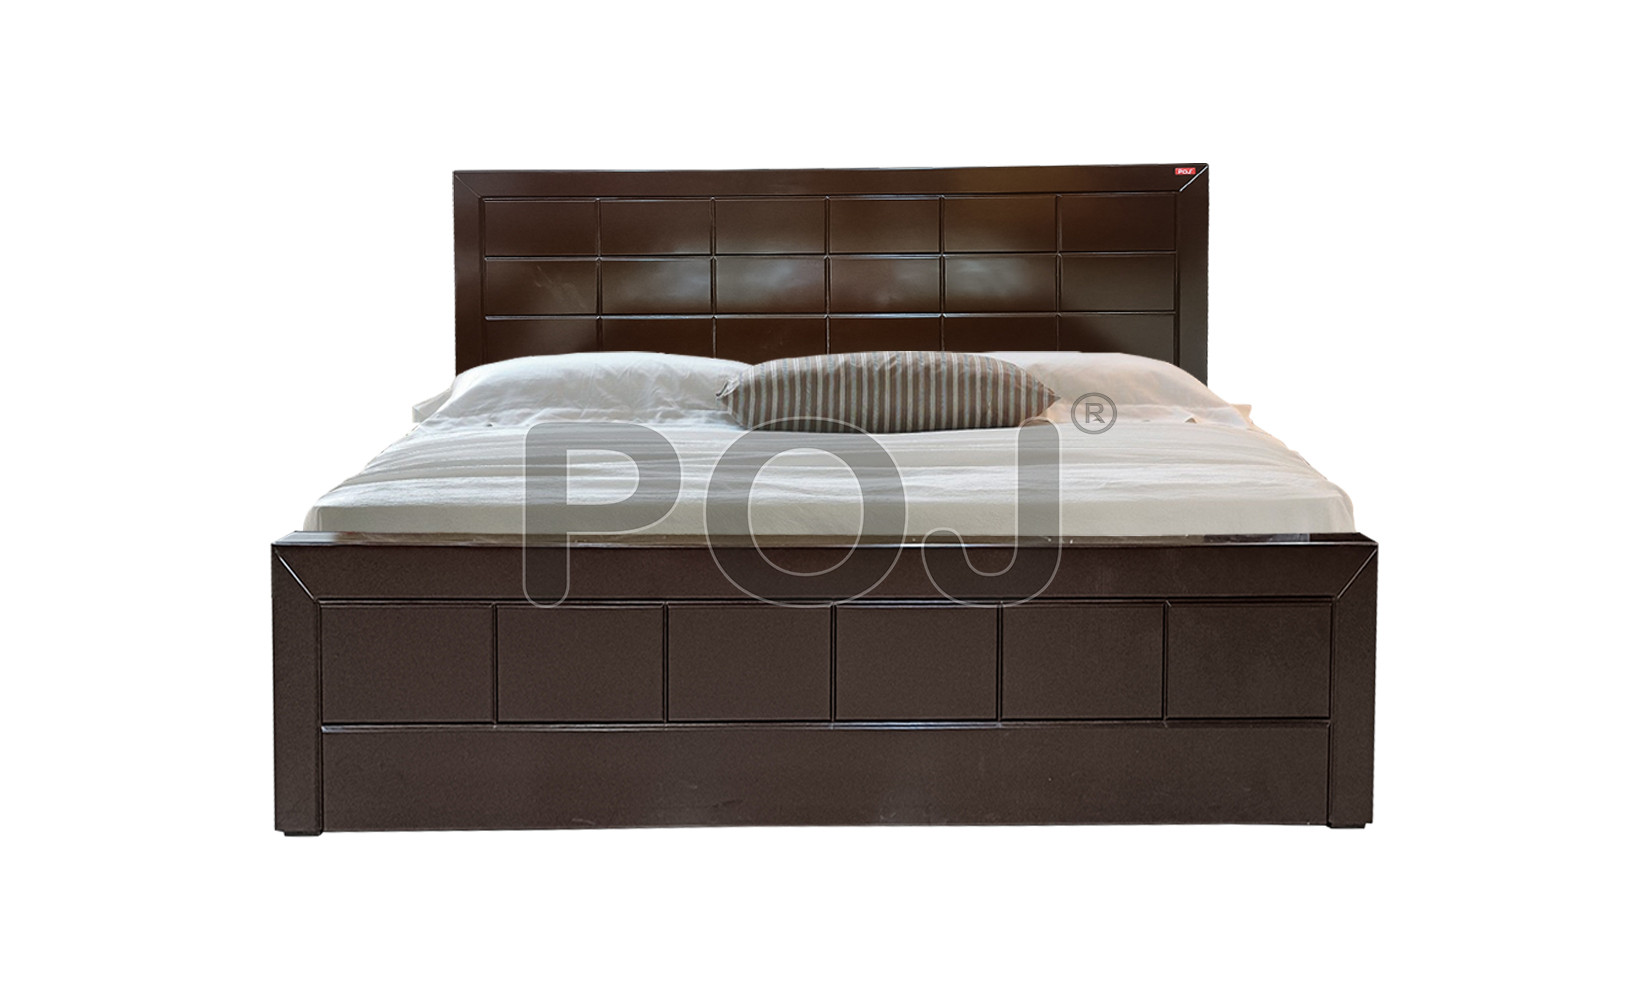 Pinnacle King Size Bed With  Full Hydraulic Storage